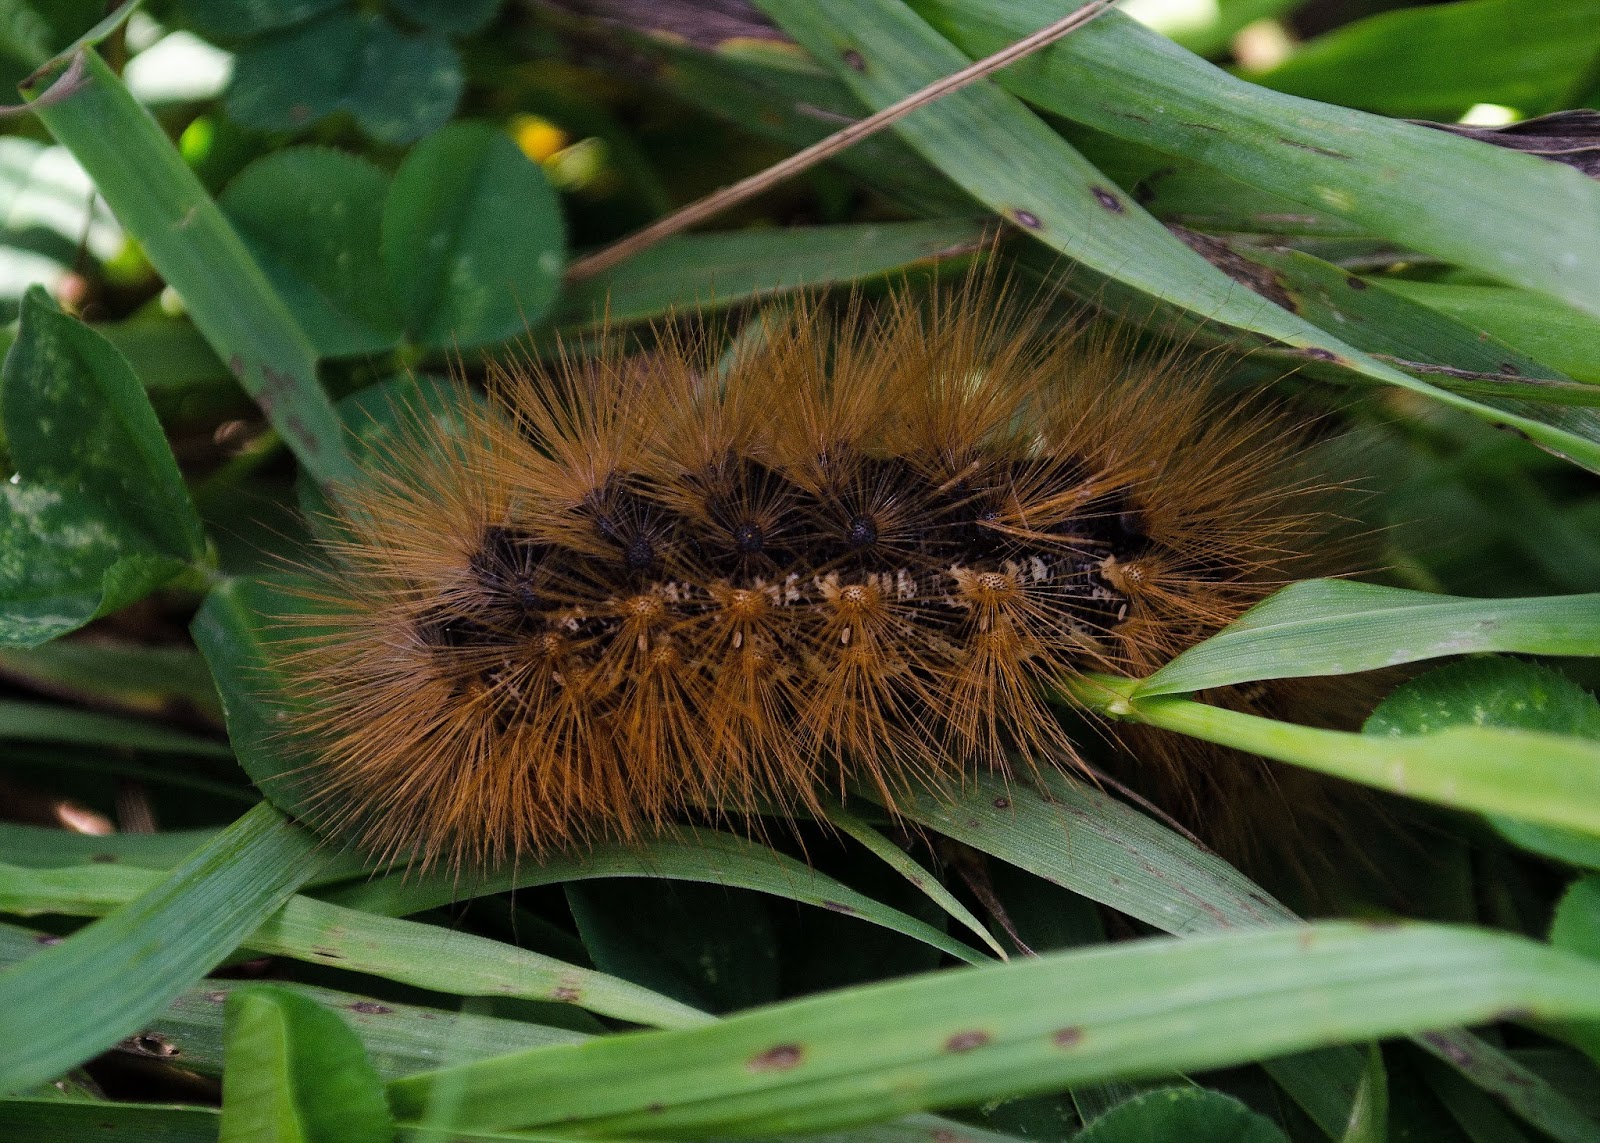 On The Subject Of Nature Caterpillars Of The Fuzzy Variety